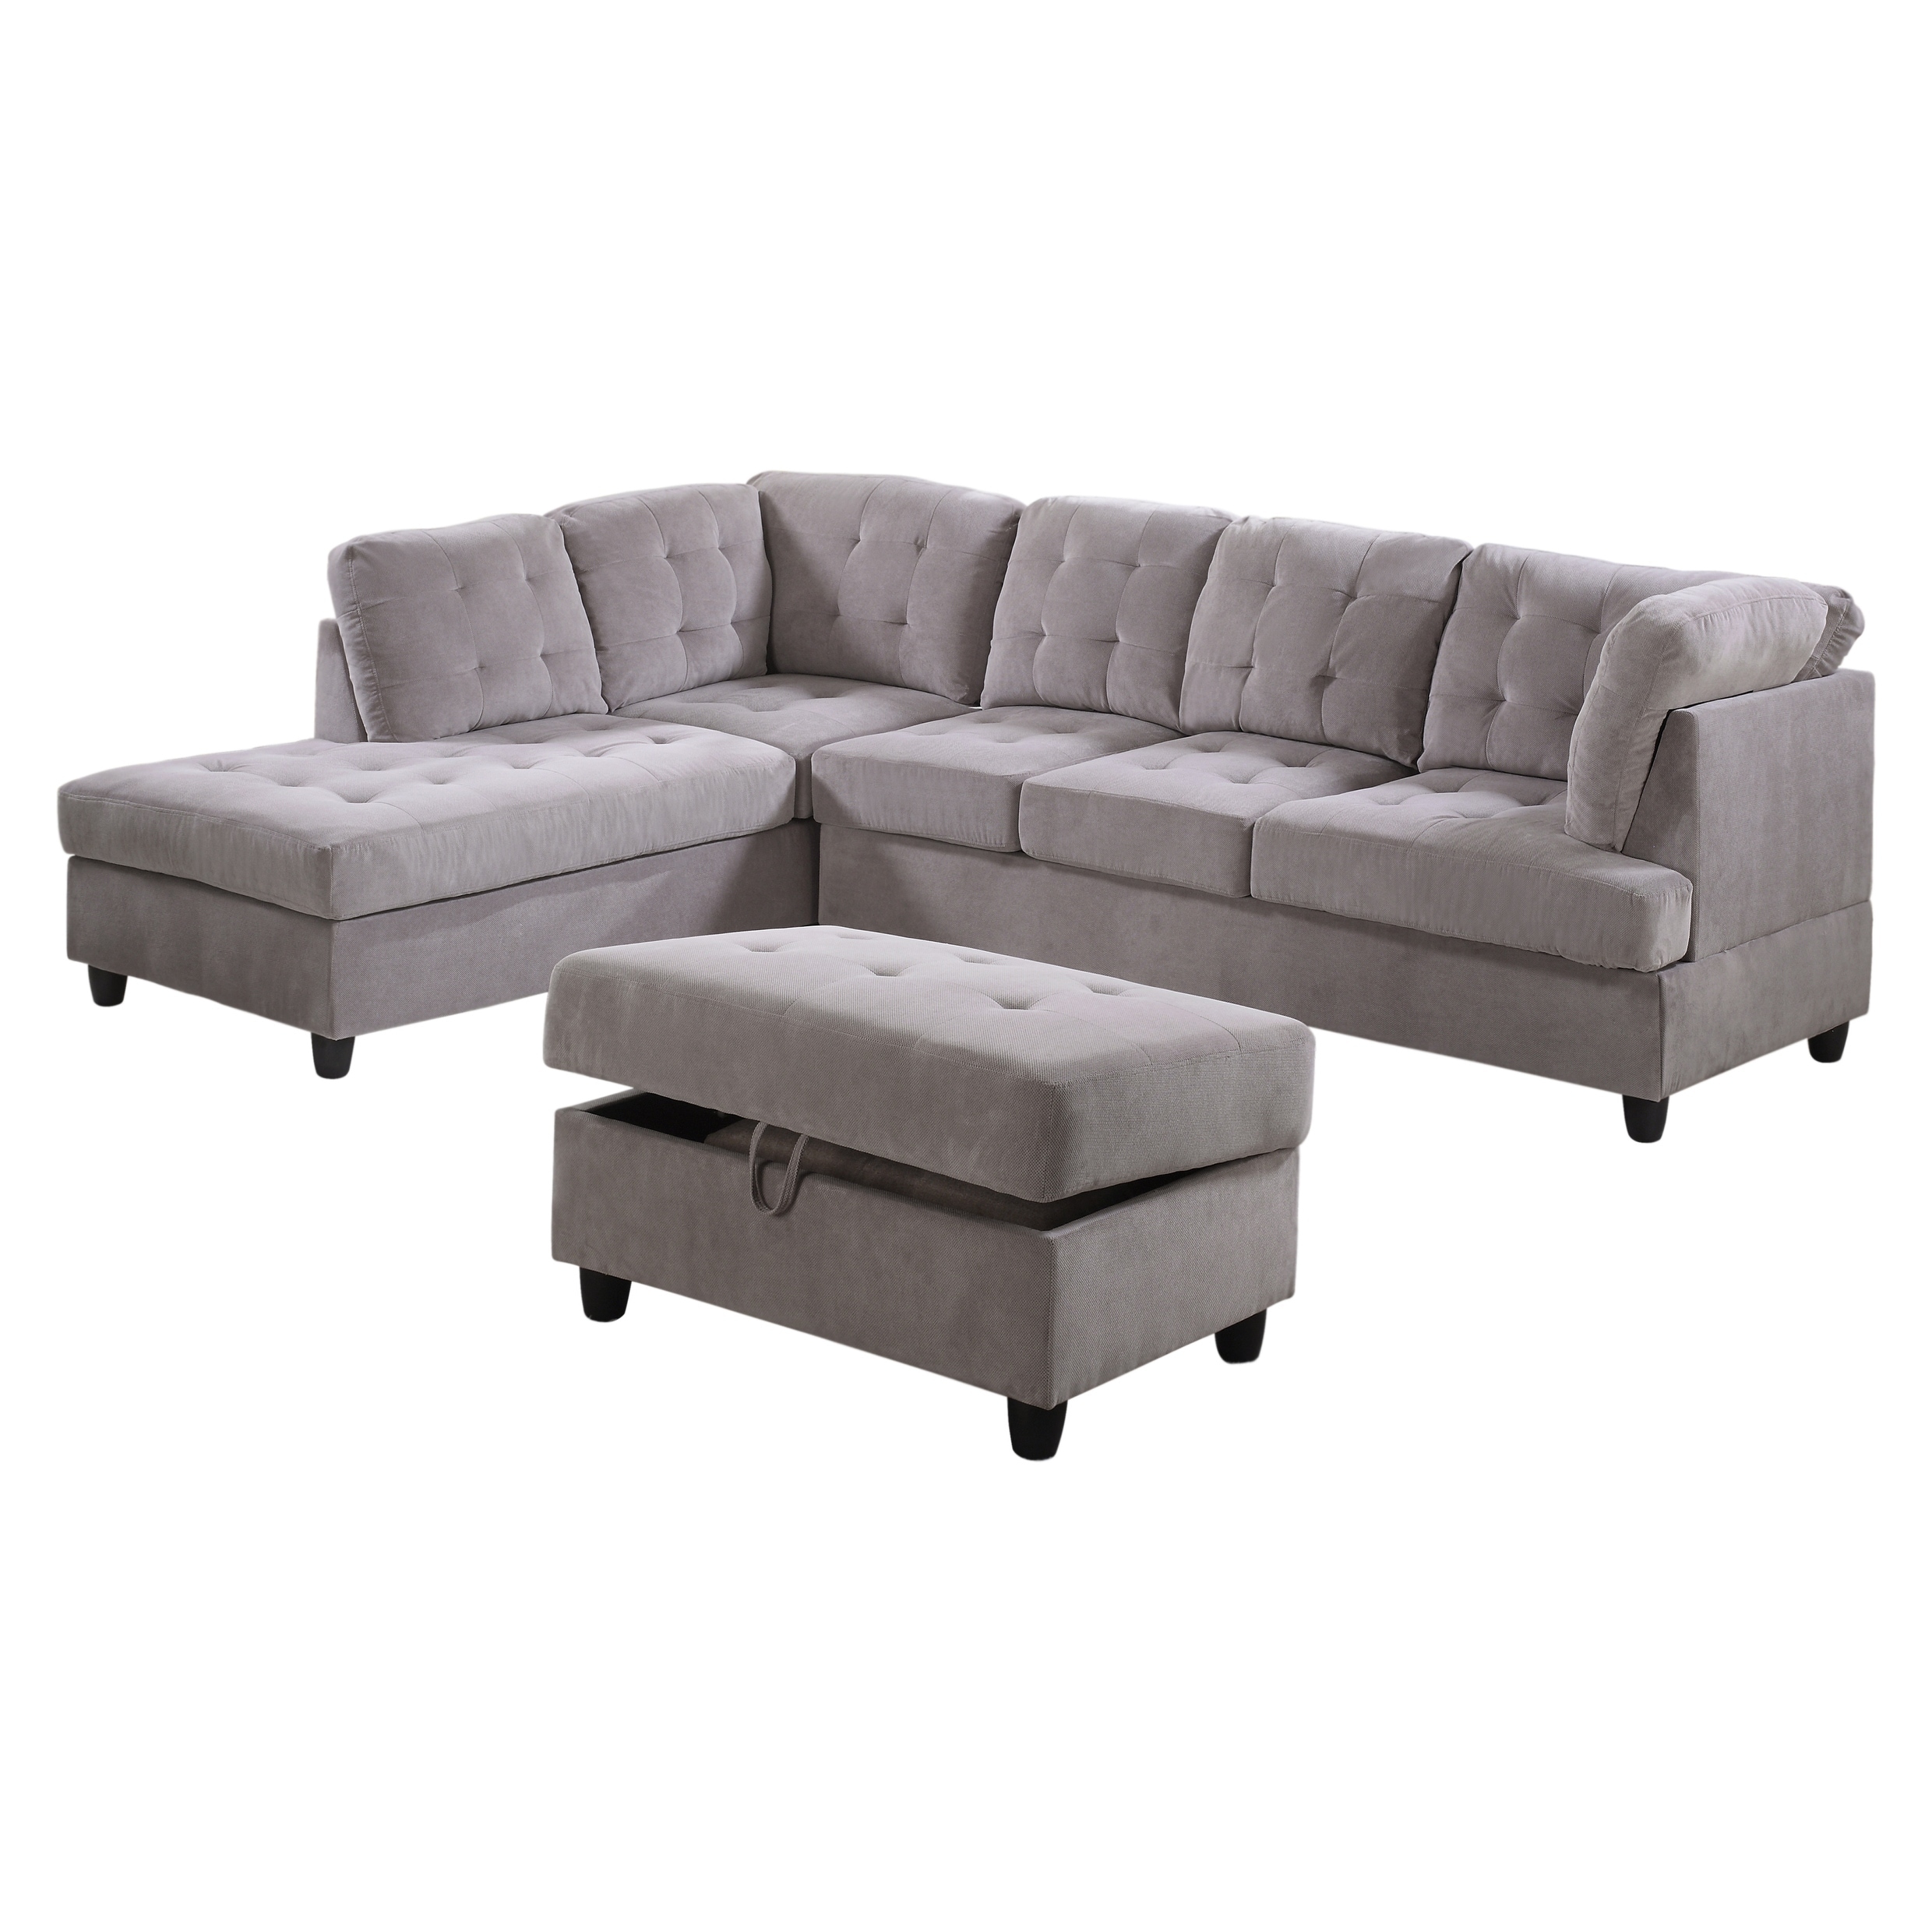 Shop Aycp Furniture Corduroy Sectional Sofa With Storage Ottoman